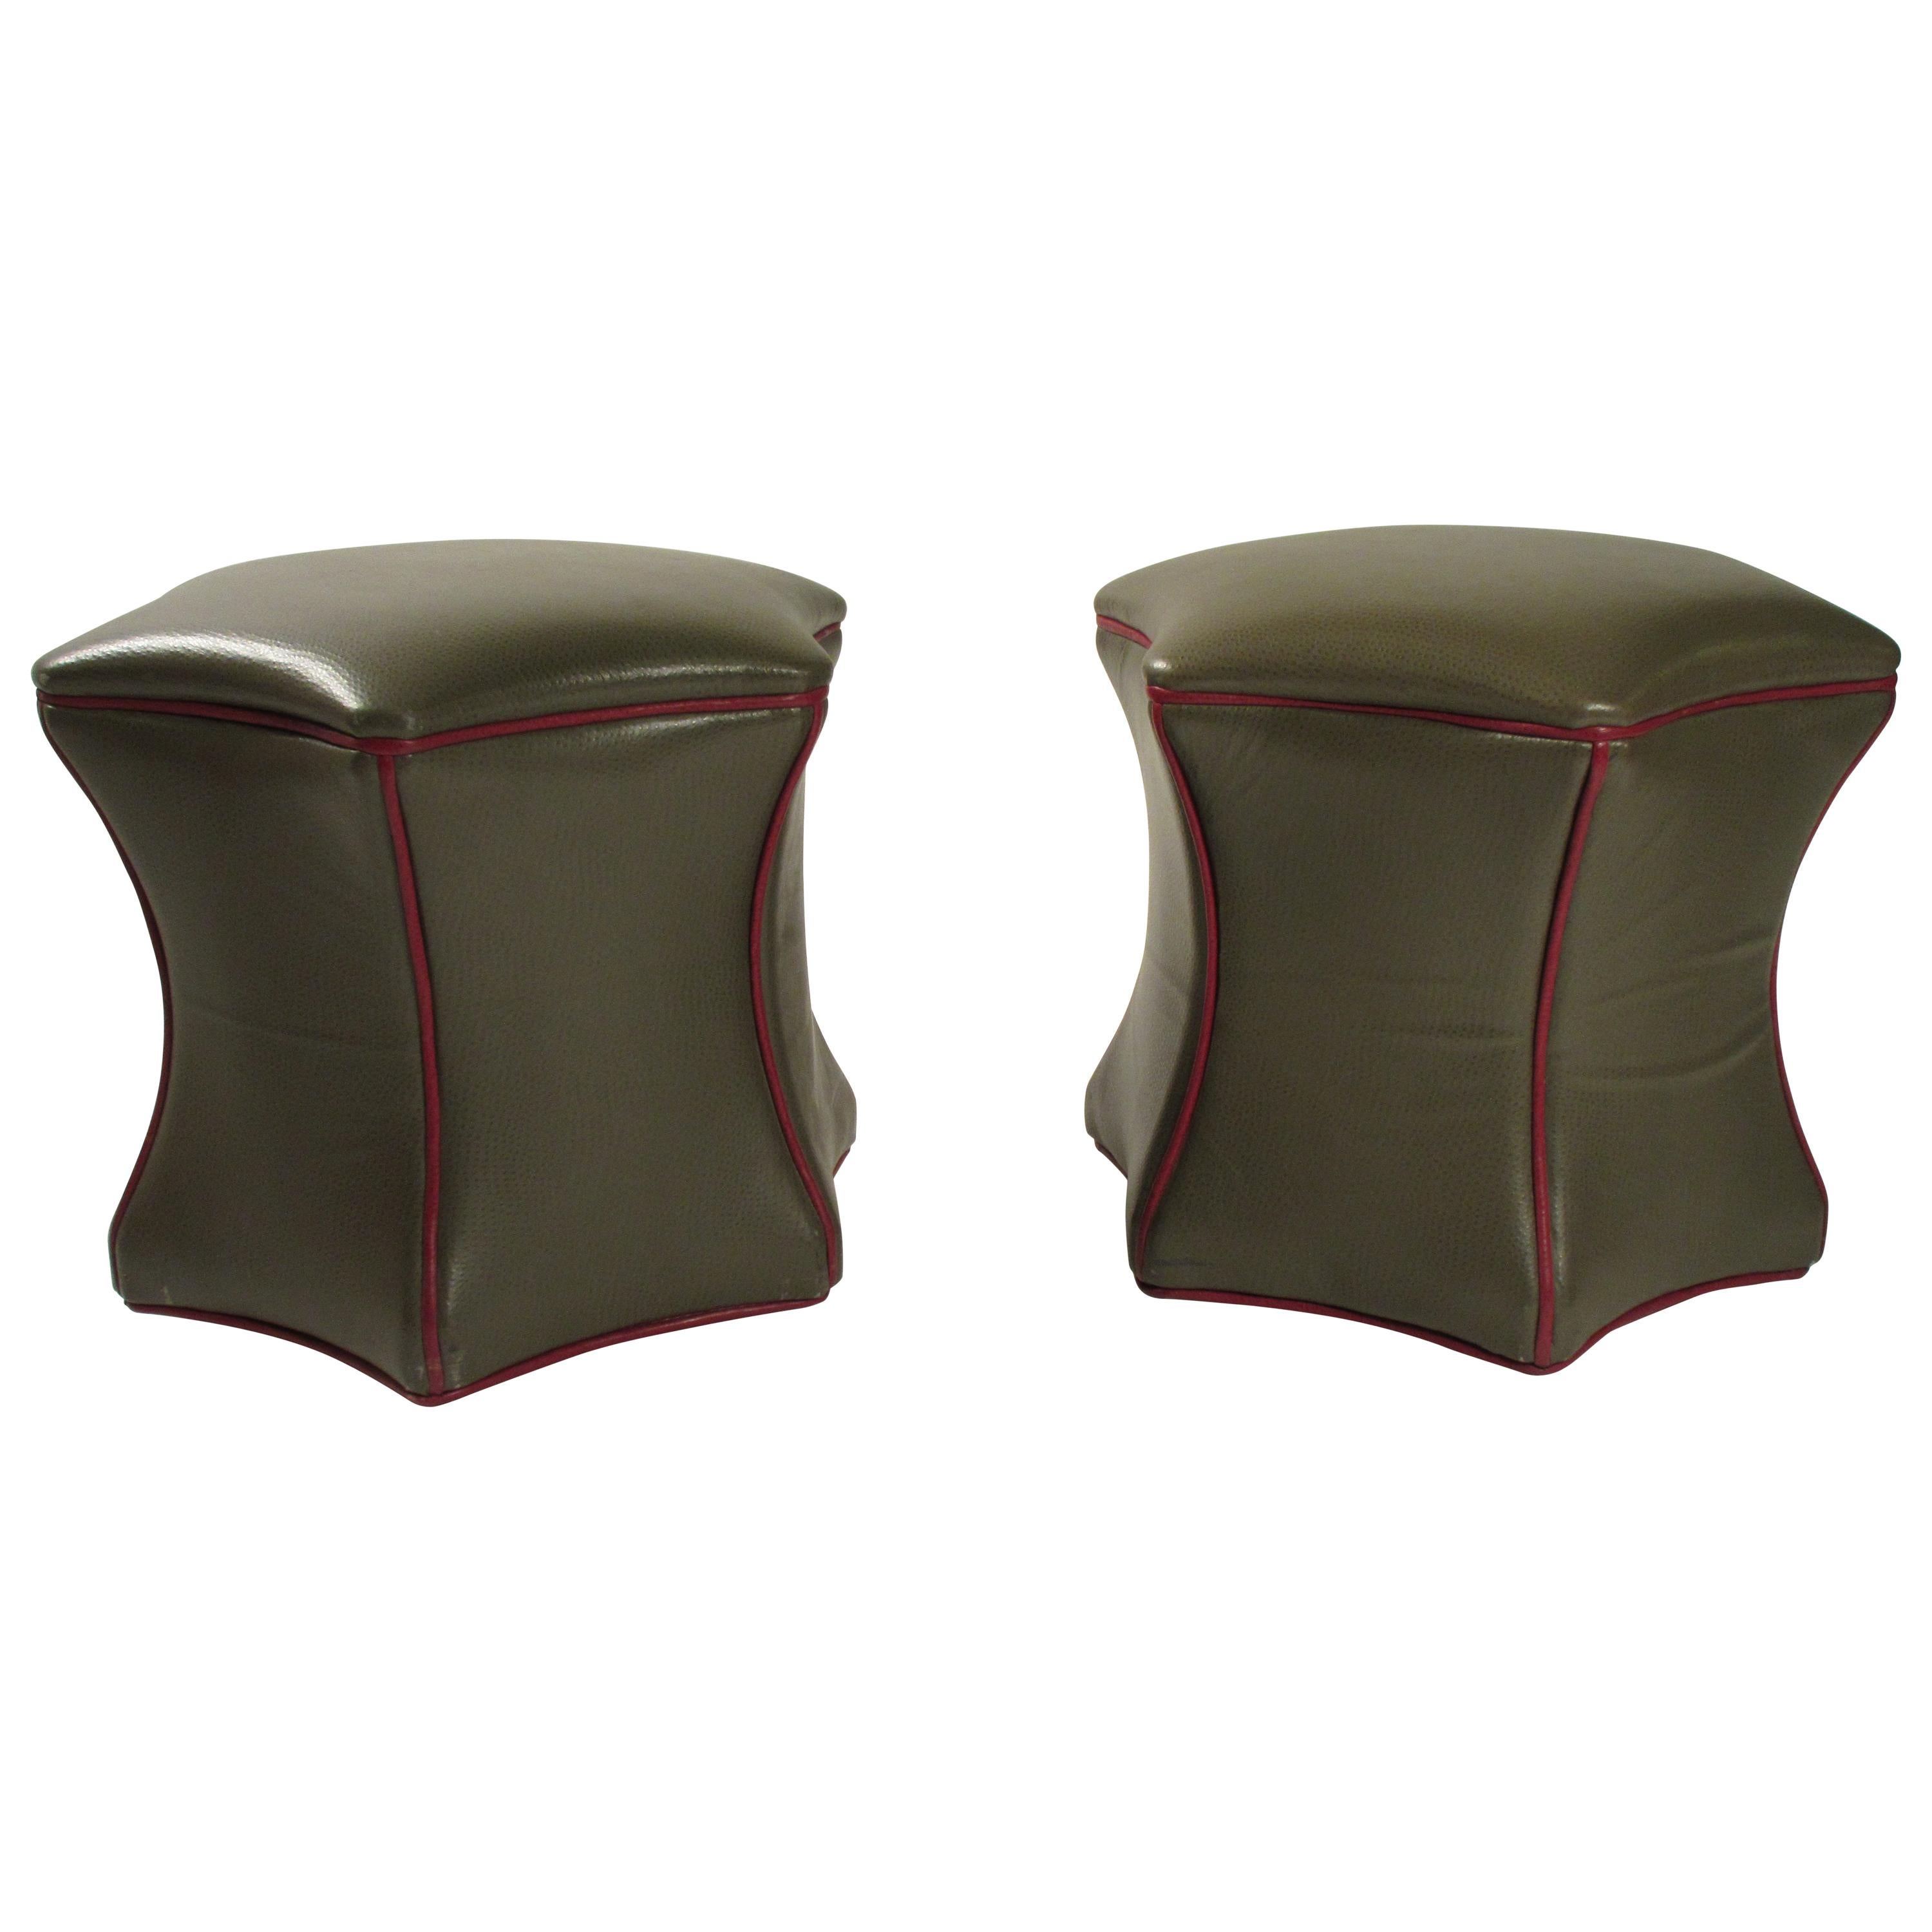 Pair of Green Leather Ottomans on Wheels